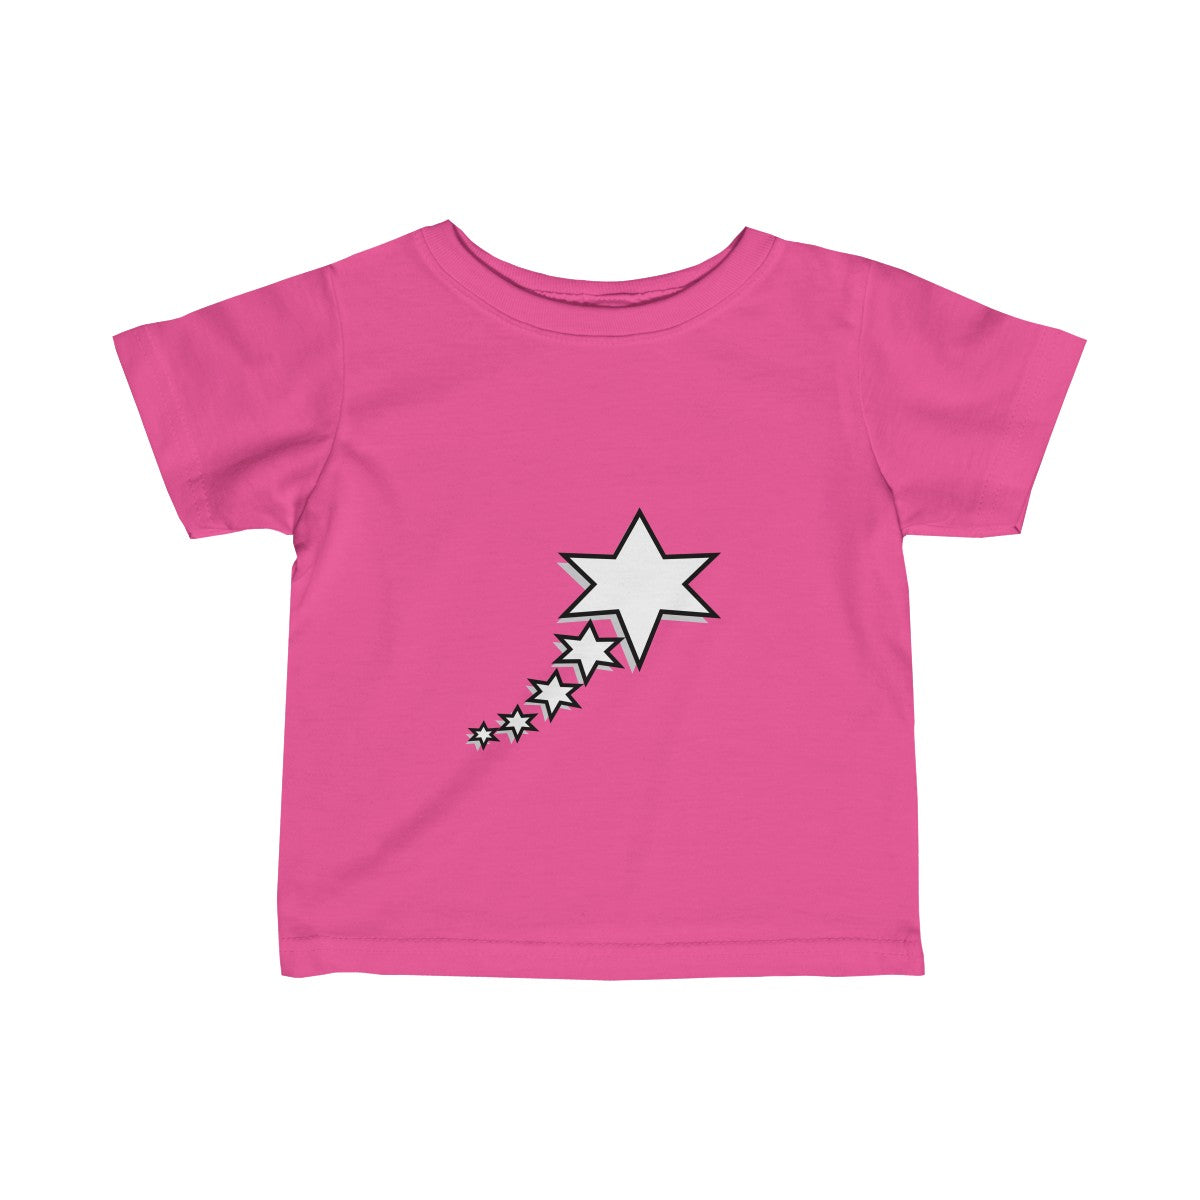 Infant Fine Jersey Tee - 6 Points 5 Stars (White)